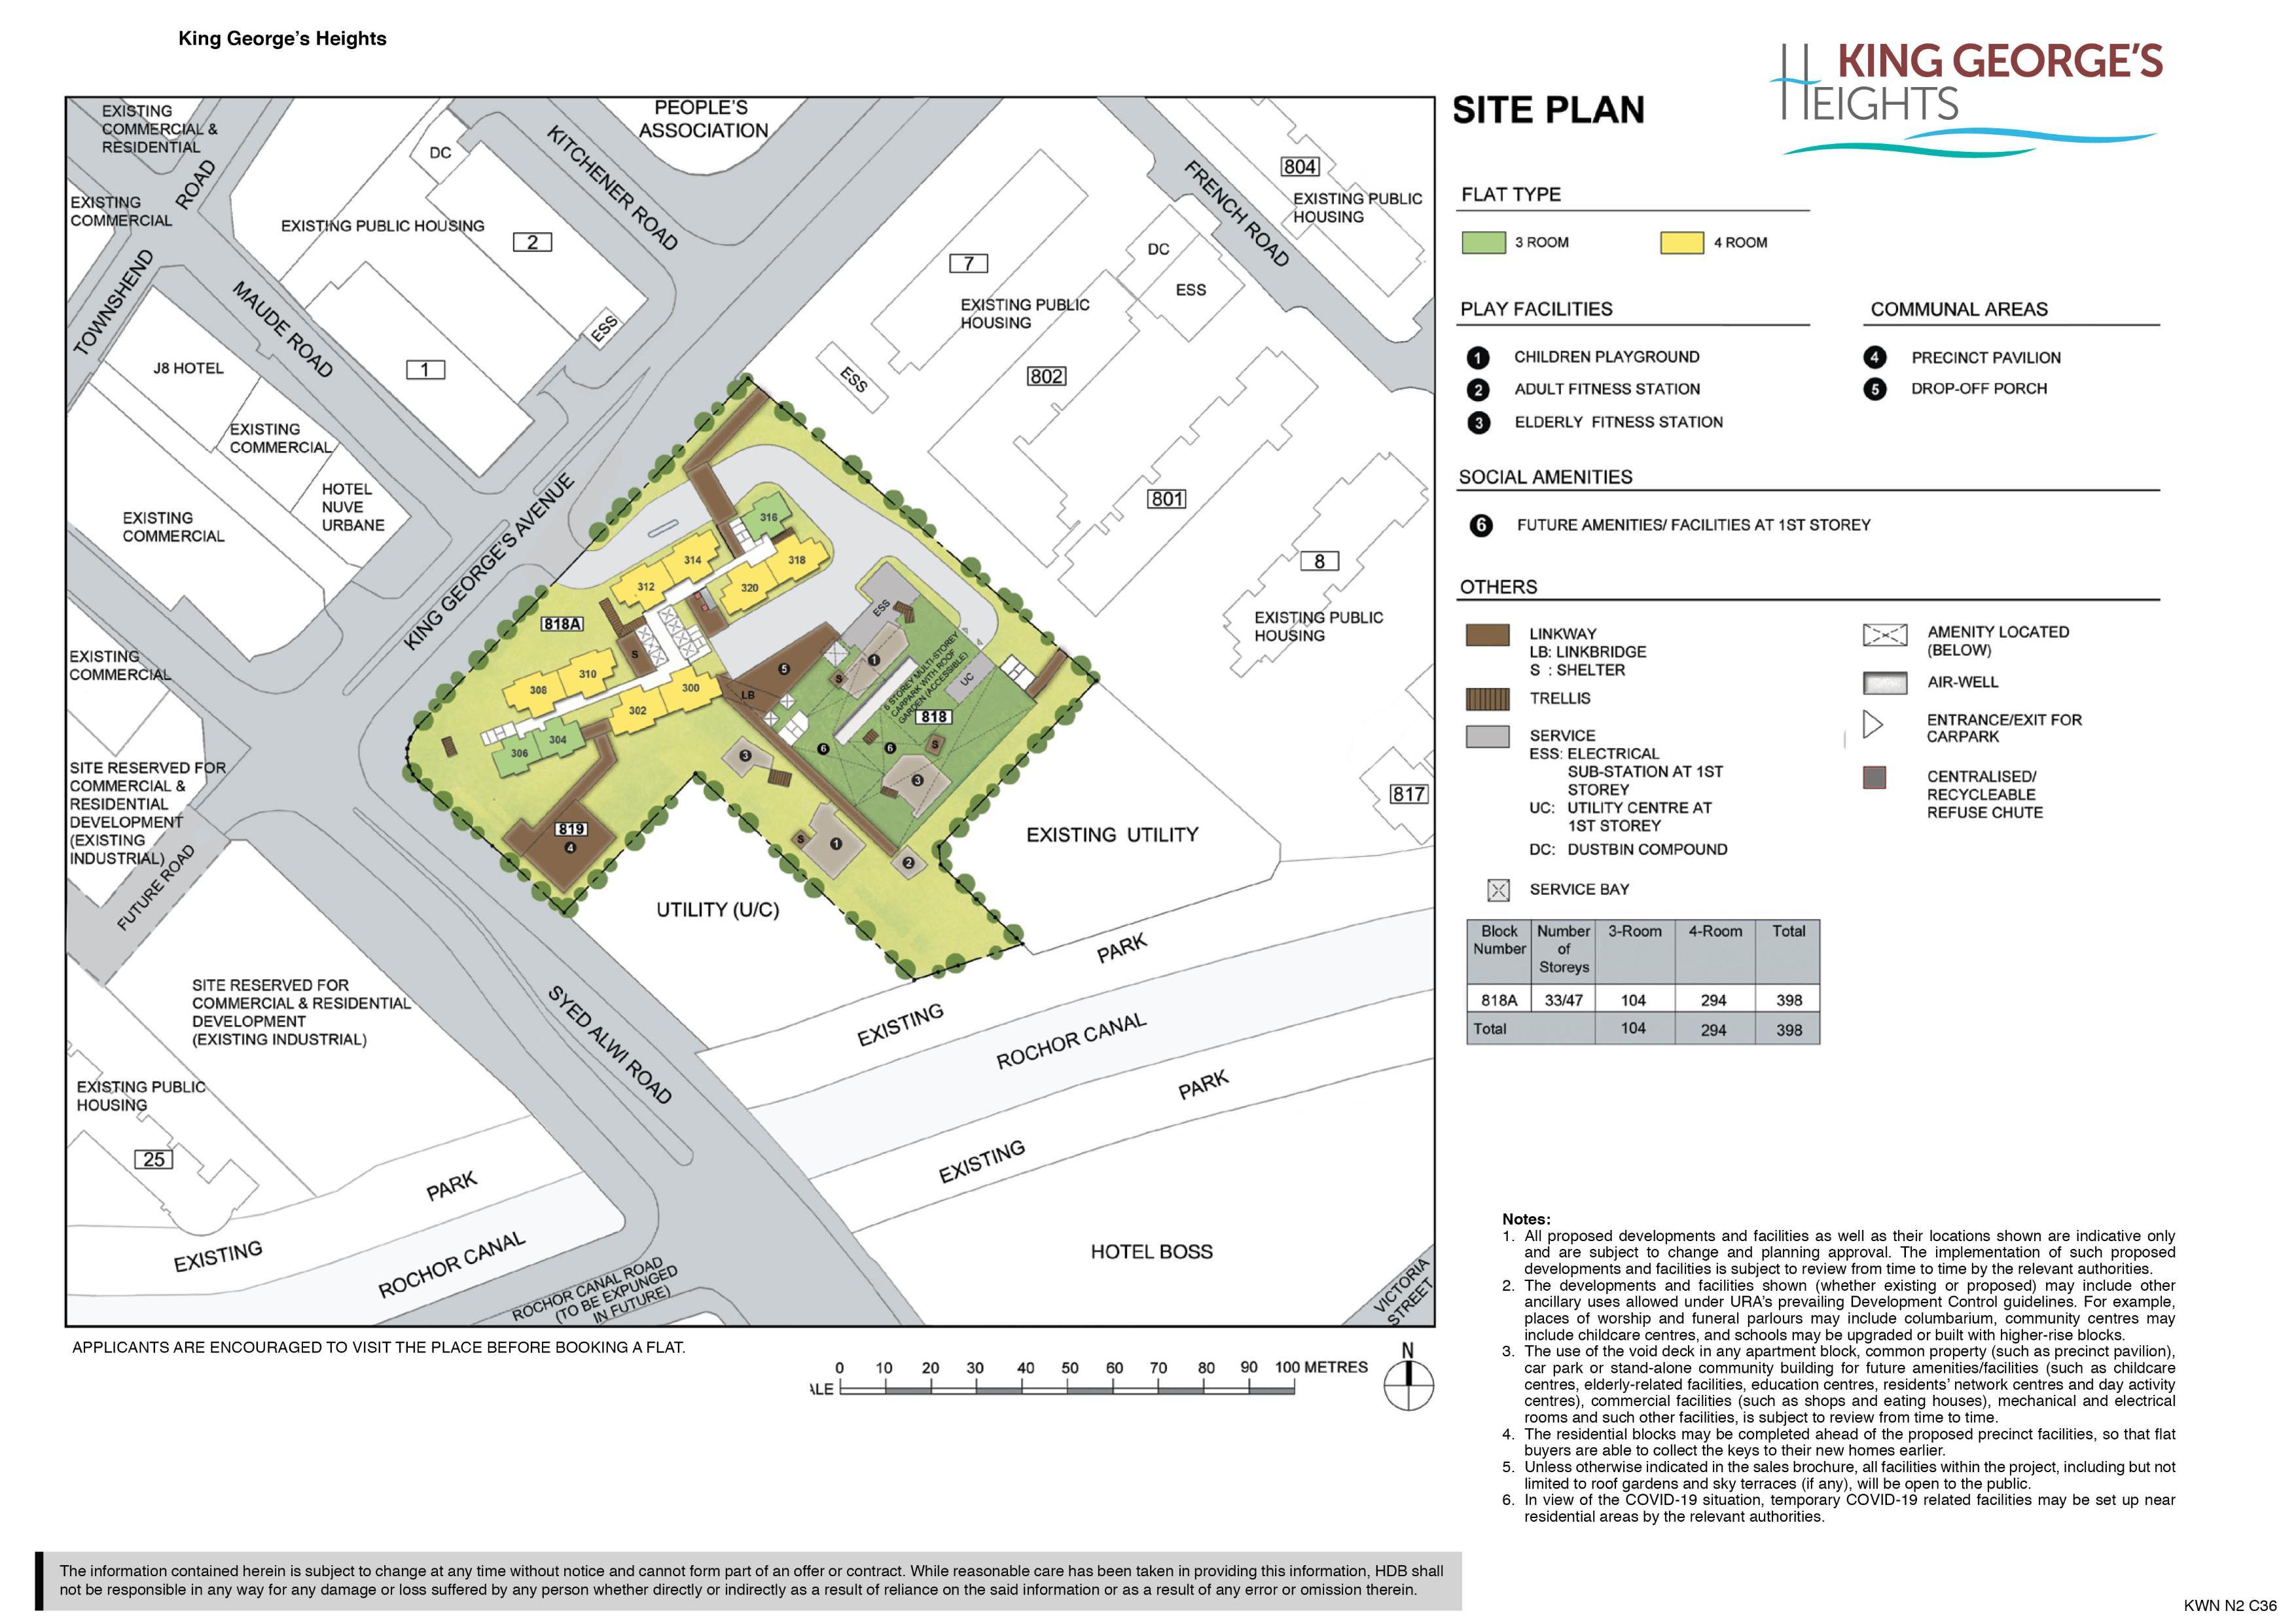 King George’s Heights site-plan